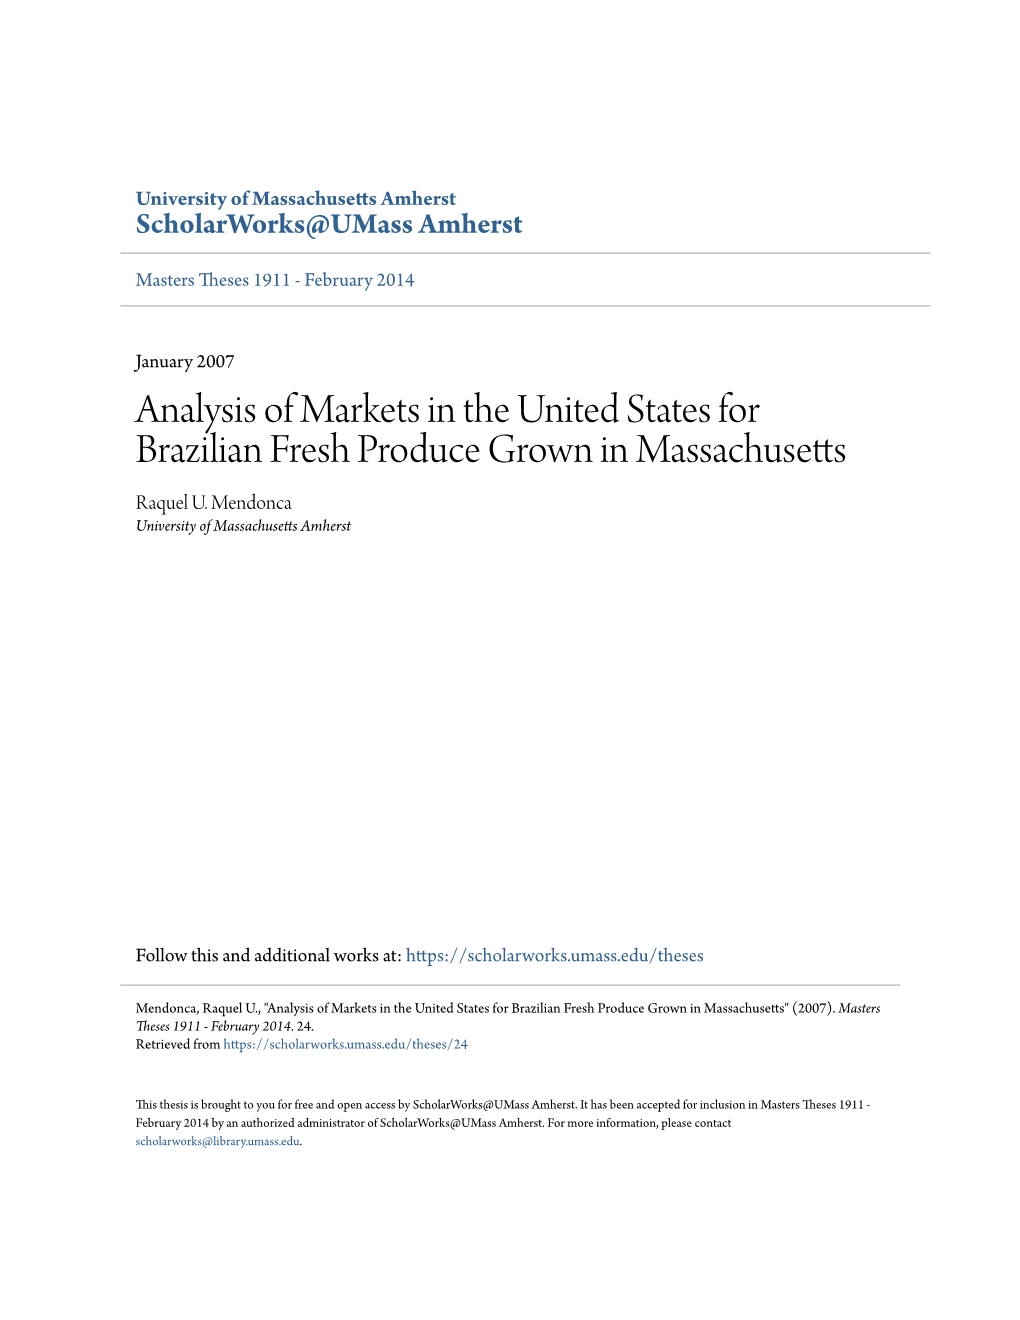 Analysis of Markets in the United States for Brazilian Fresh Produce Grown in Massachusetts Raquel U